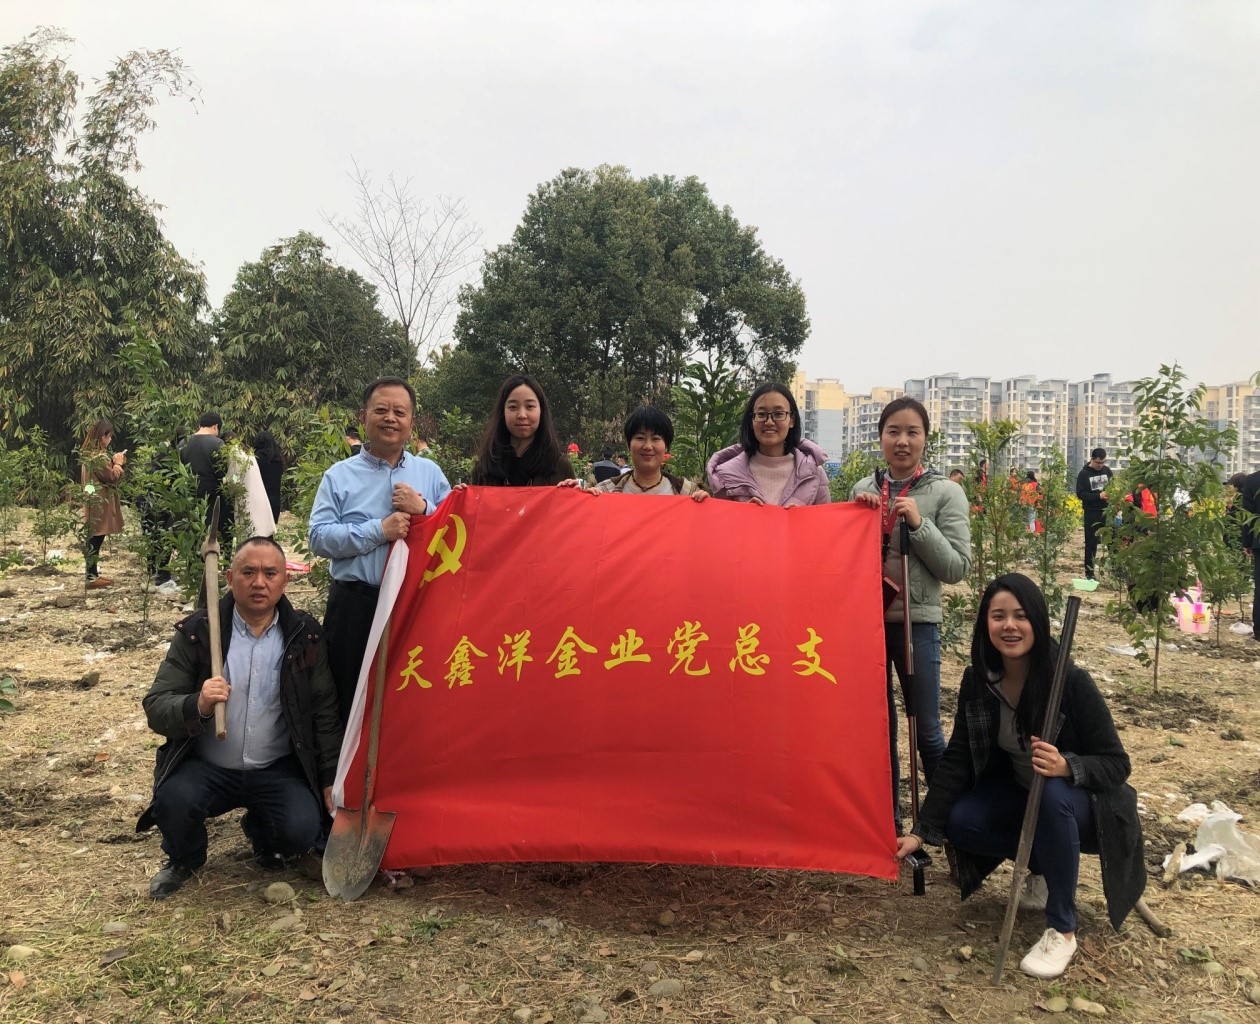 Tianxinyang Party Branch participated in the public welfare tree planting activities in the industrial park